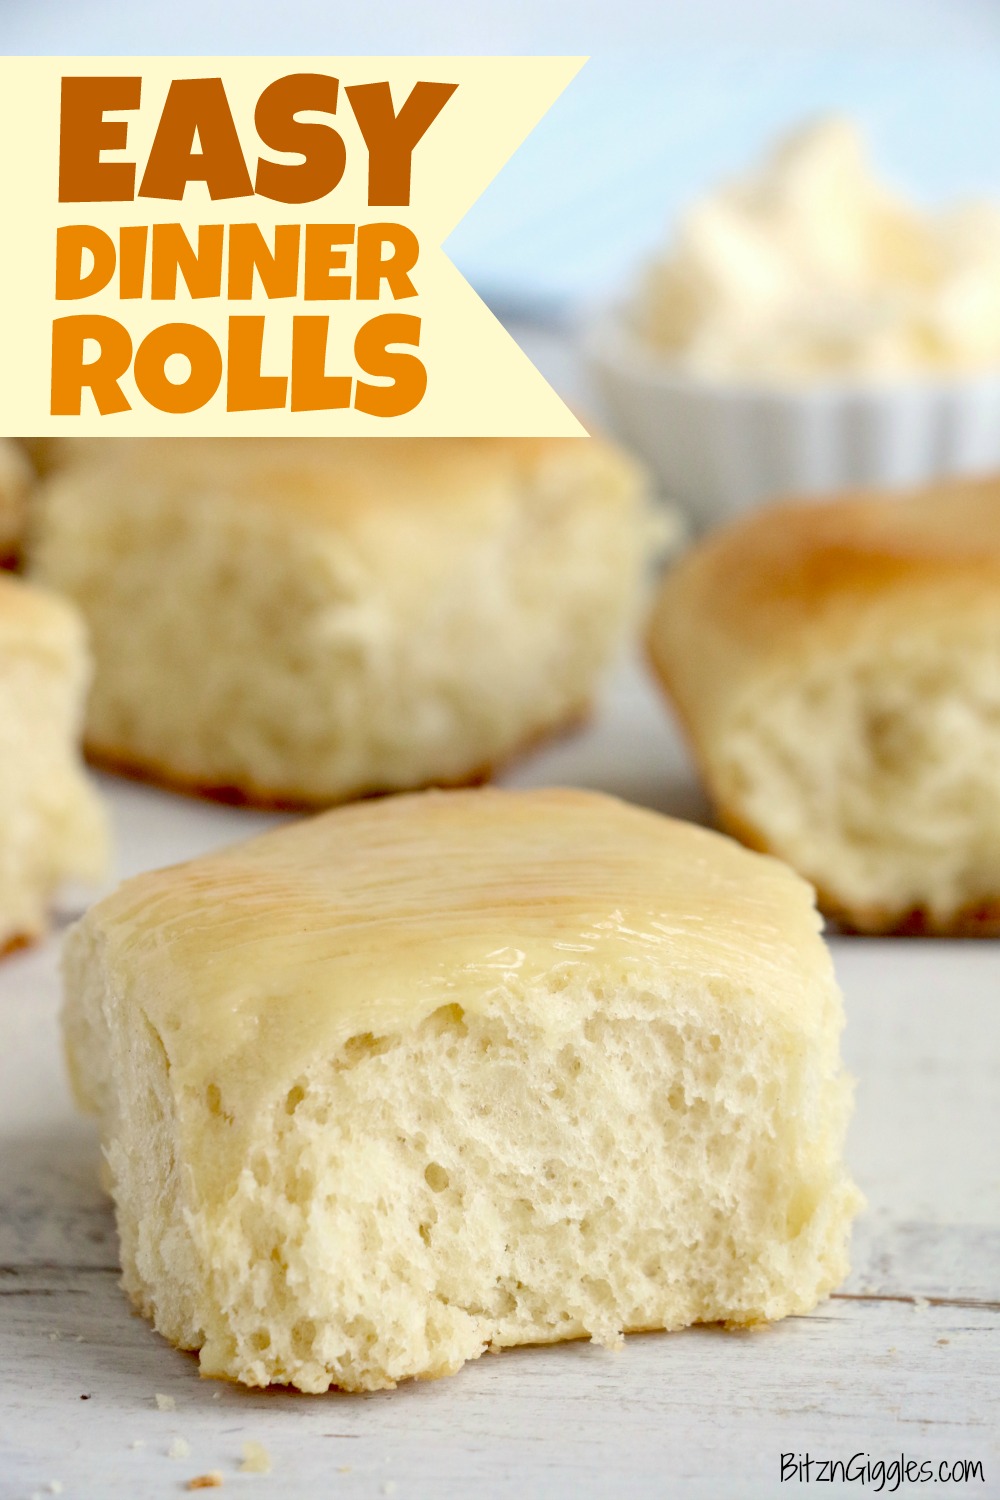 Easy Dinner Rolls - Delicious, freshly baked dinner rolls that come together easily for a holiday celebration or no-fuss weeknight meal! 